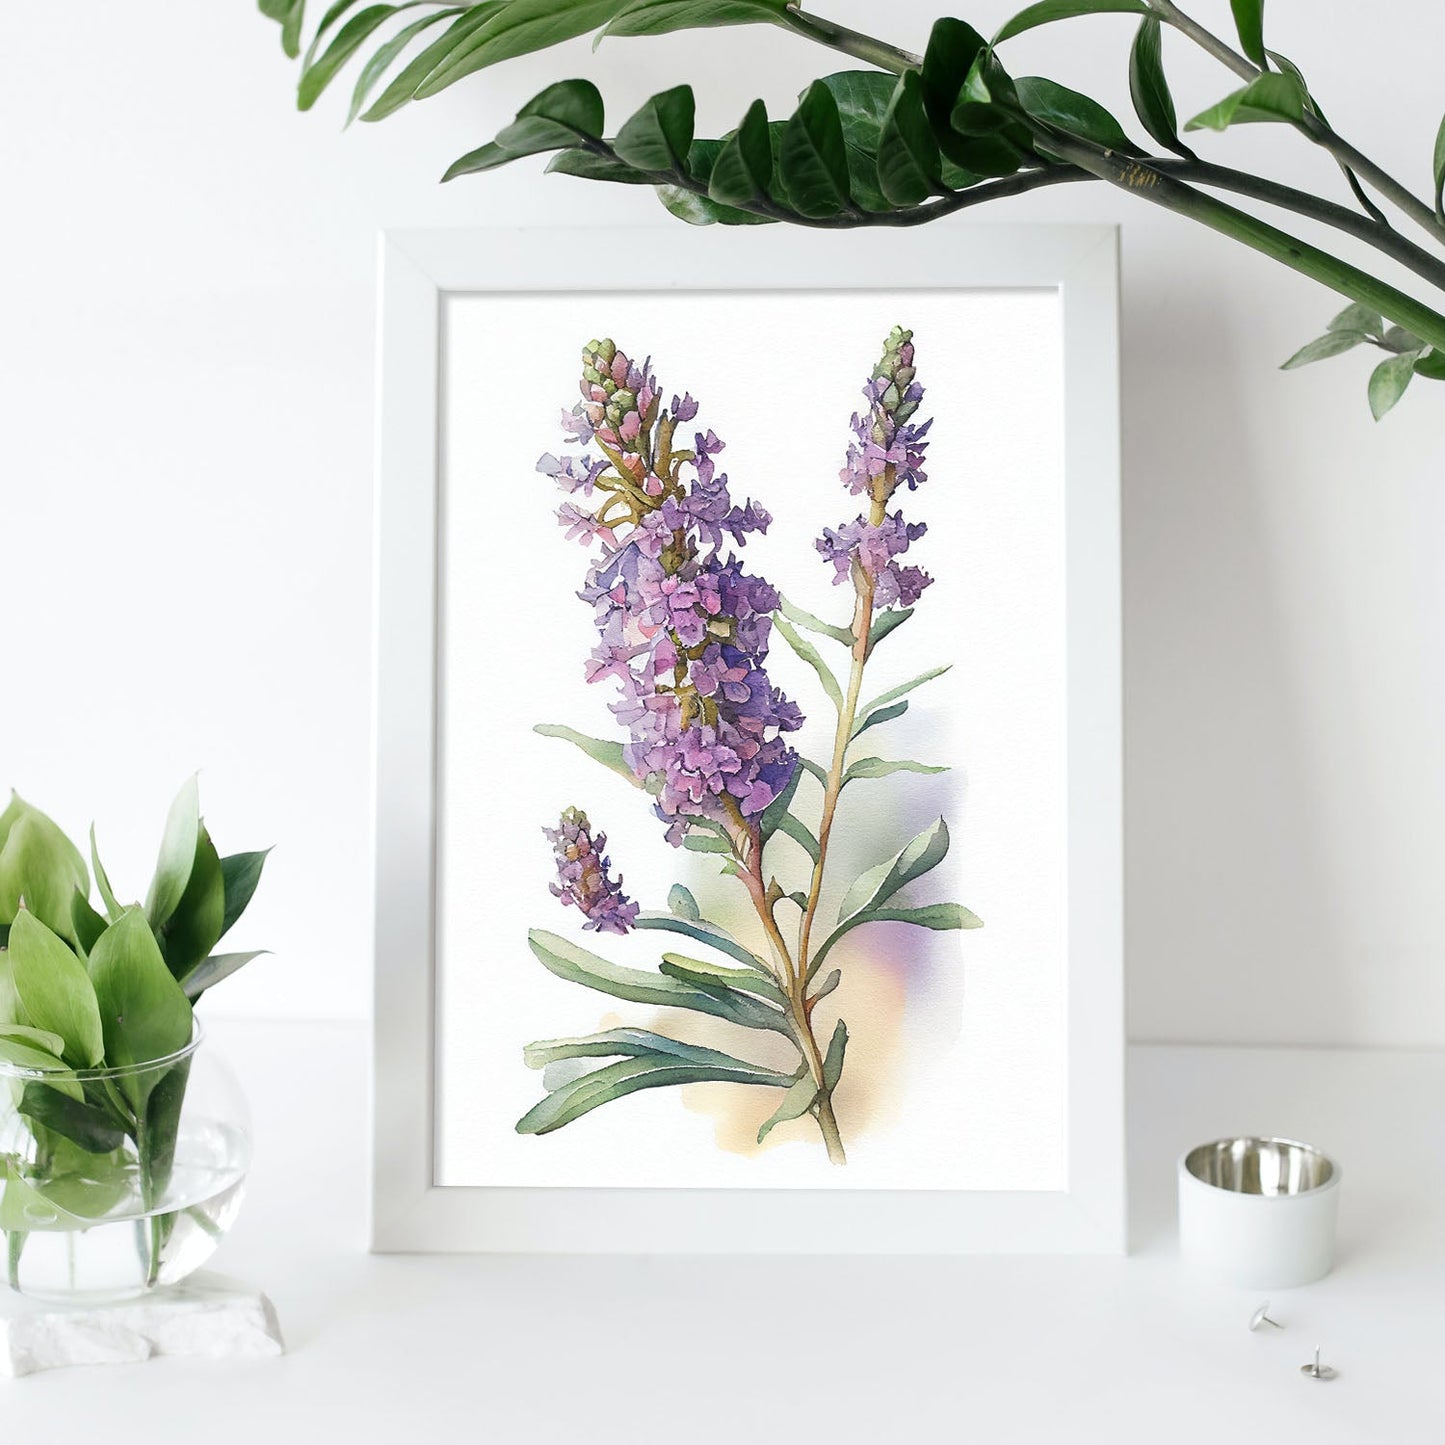 Nacnic watercolor minmal Statice_1. Aesthetic Wall Art Prints for Bedroom or Living Room Design.